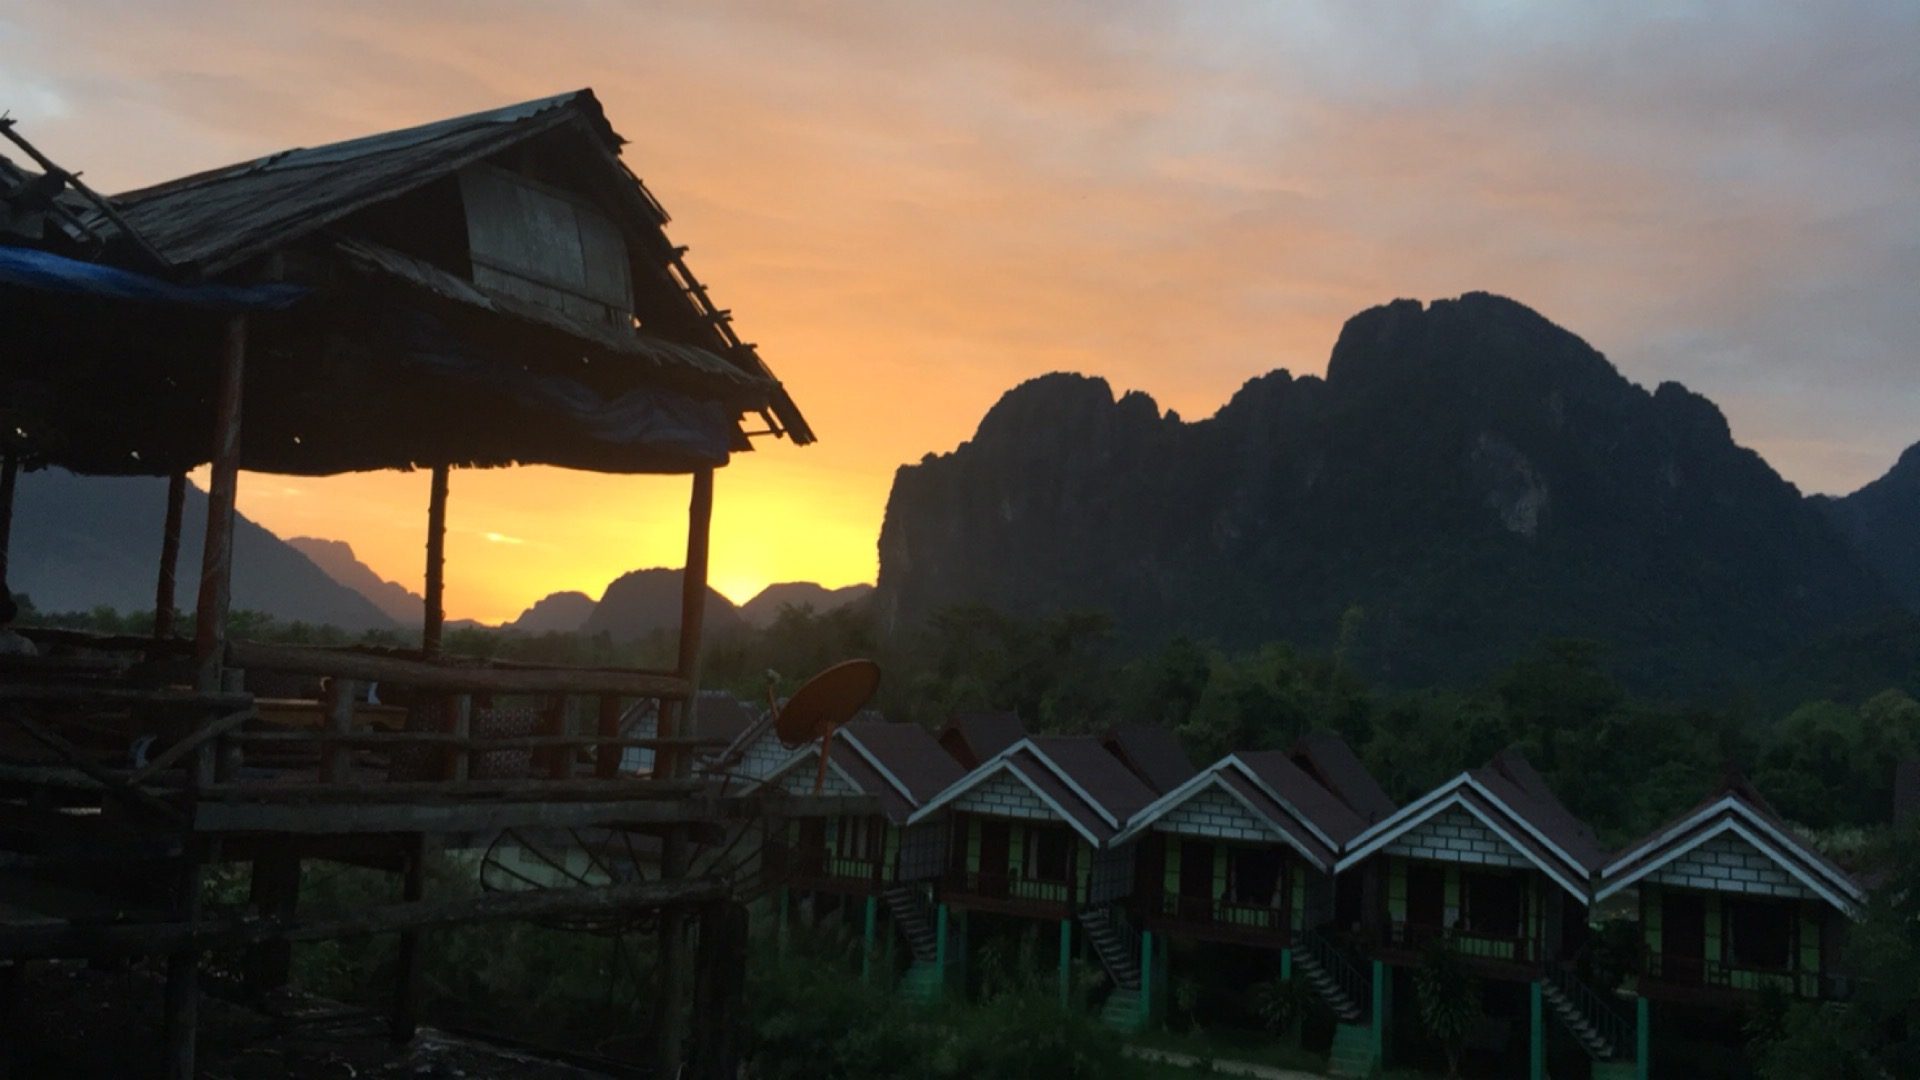 Vang Vieng sunset in Laos. The day after tubing in Vang Vieng